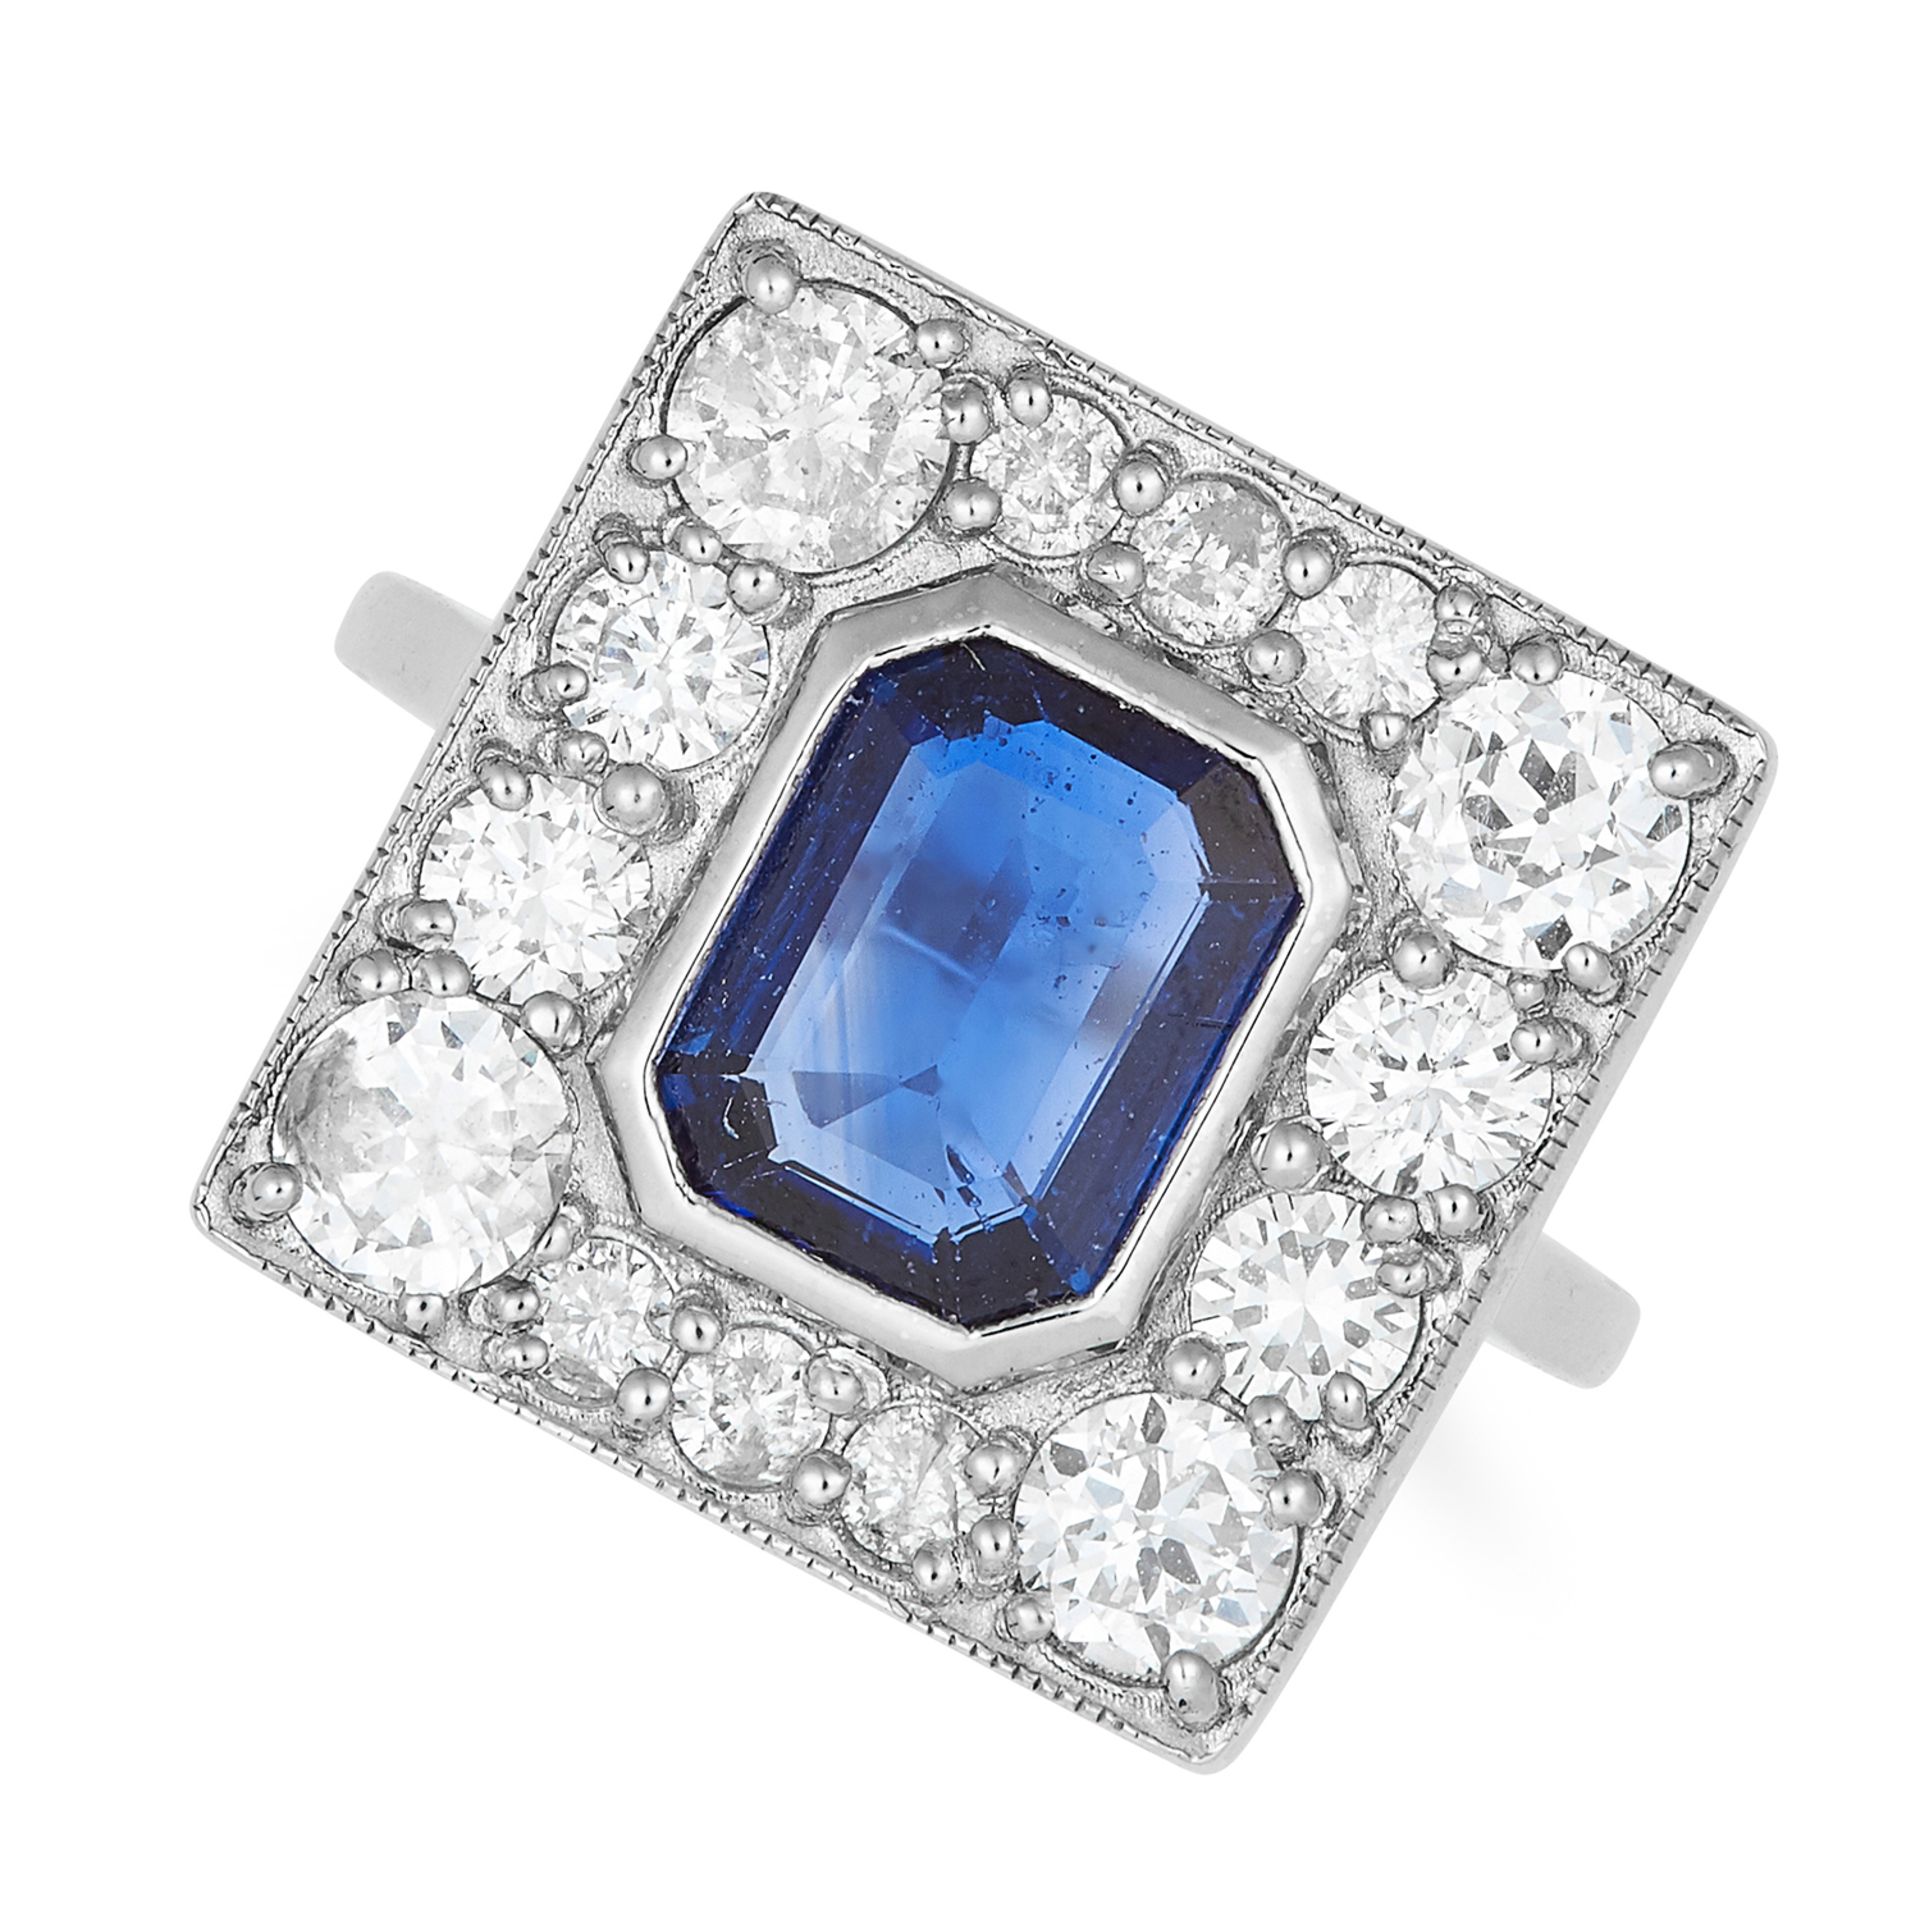 SAPPHIRE AND DIAMOND CLUSTER RING in Art Deco style, set with an emerald cut sapphire of